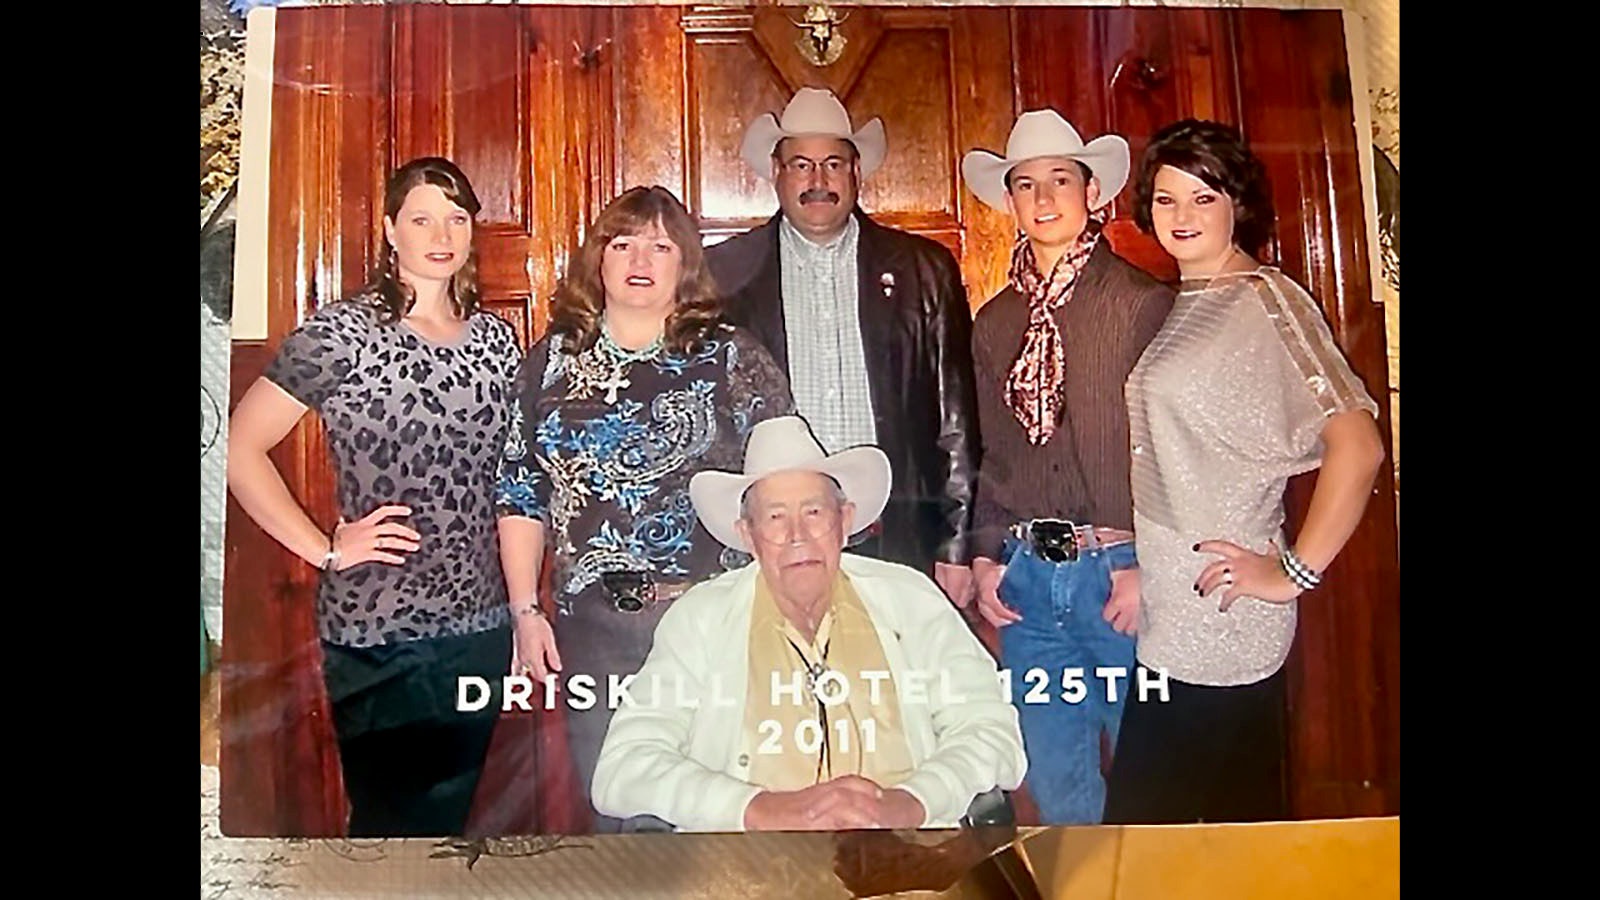 State Sen. Ogden Driskill, standing center, and the rest of the Driskill family at the 125th birthday of the family's namesake hotel The Driskill in Austin, Texas.